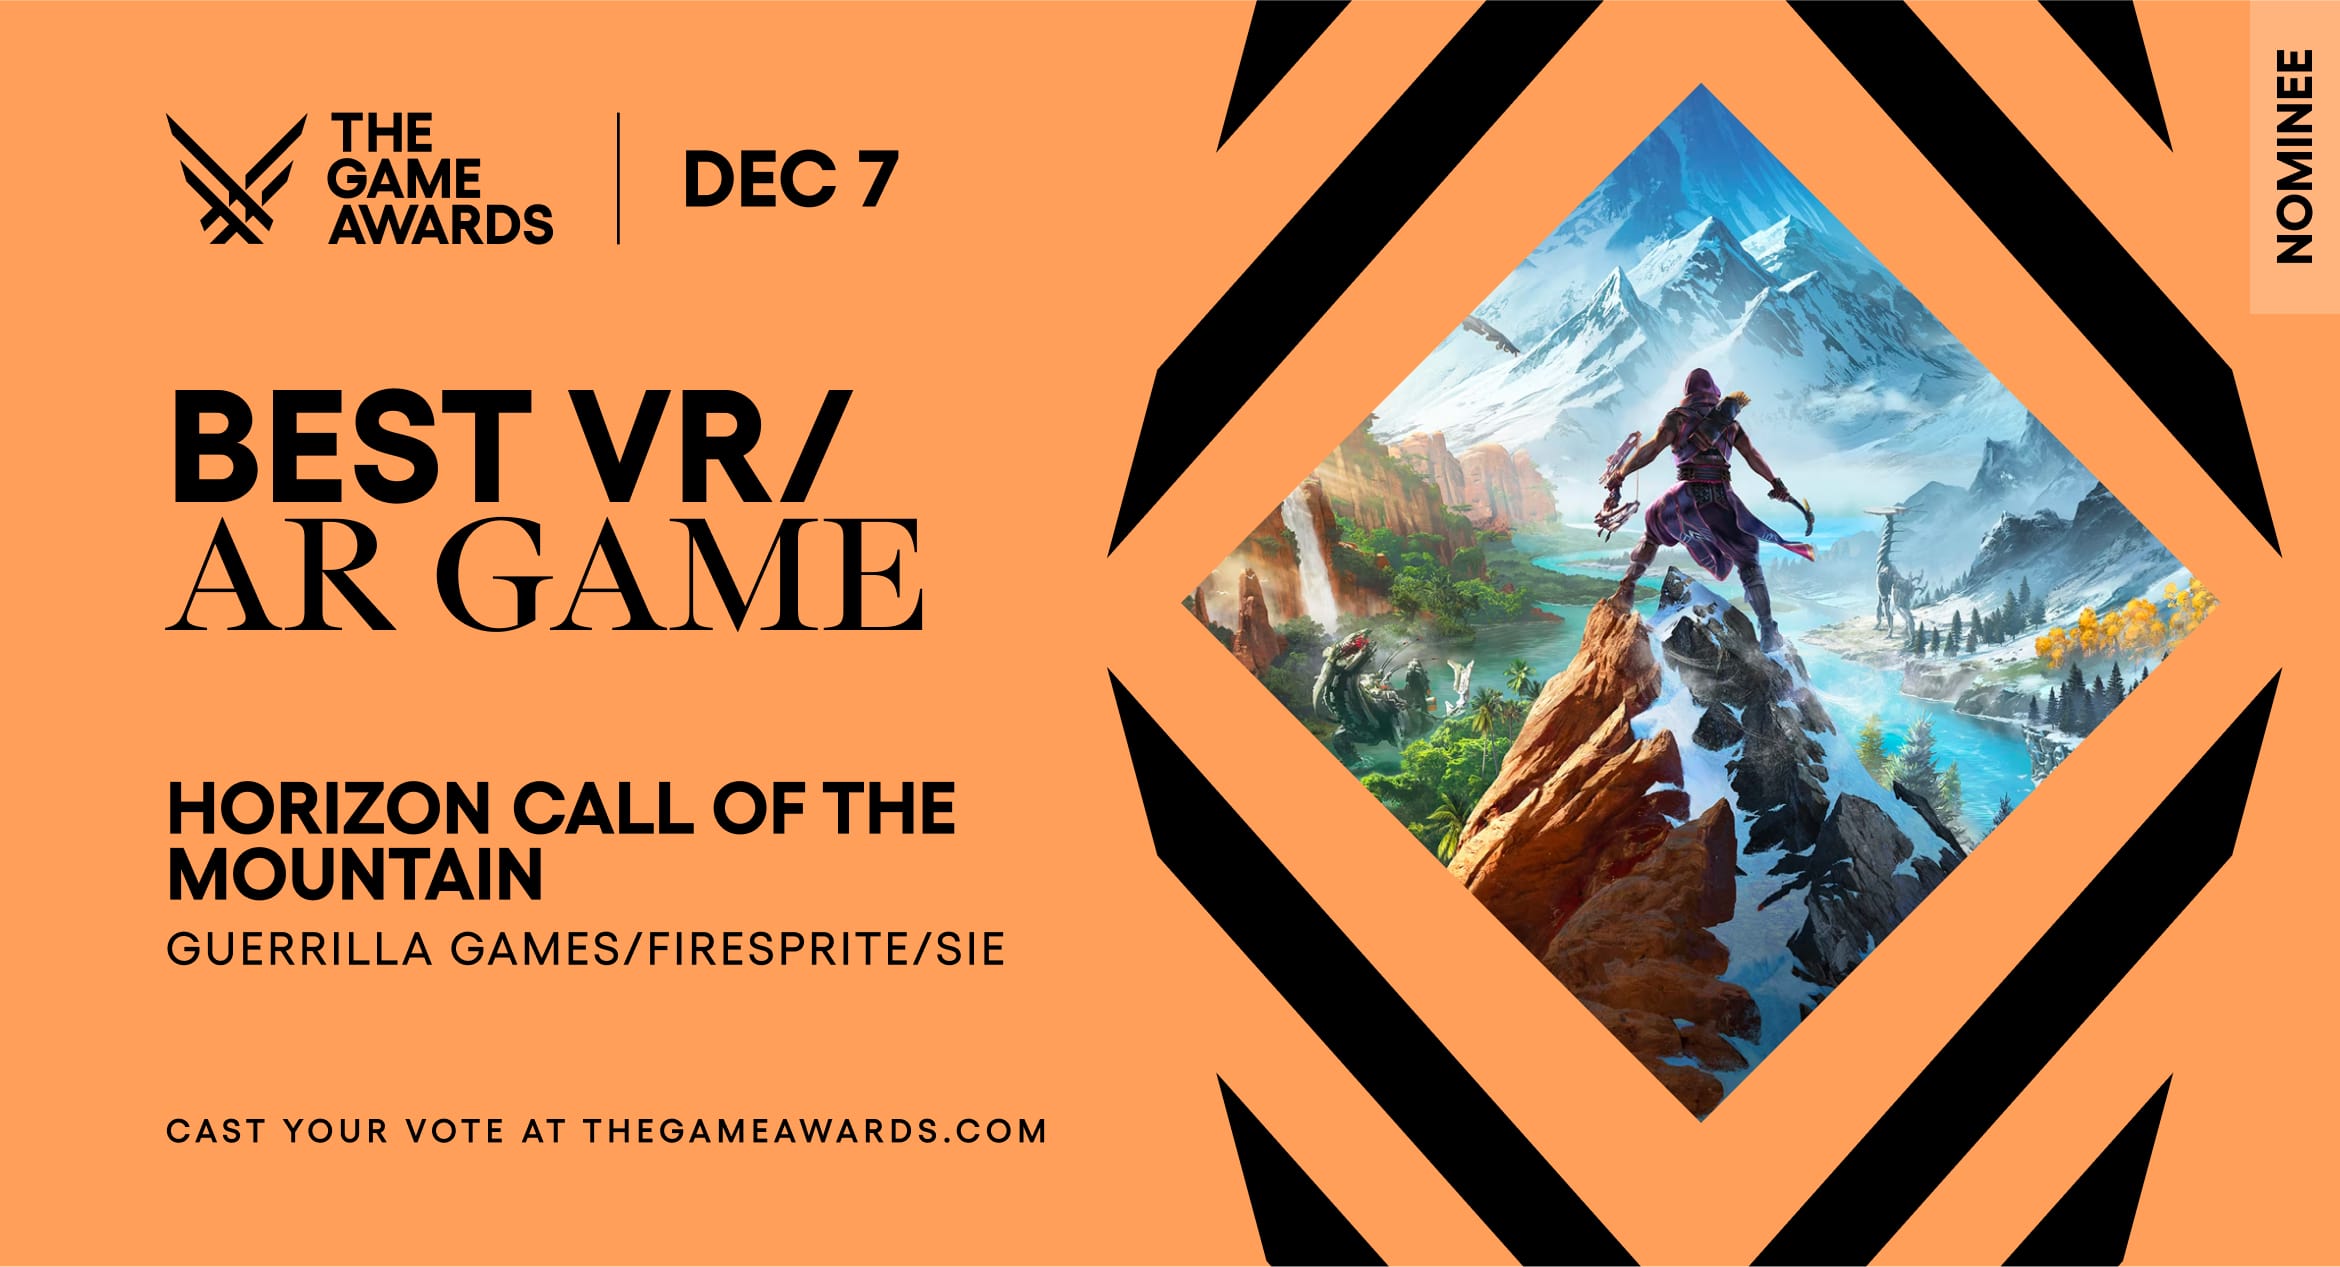 Gran Turismo 7 is nominated for best VR/AR game at the Game Awards